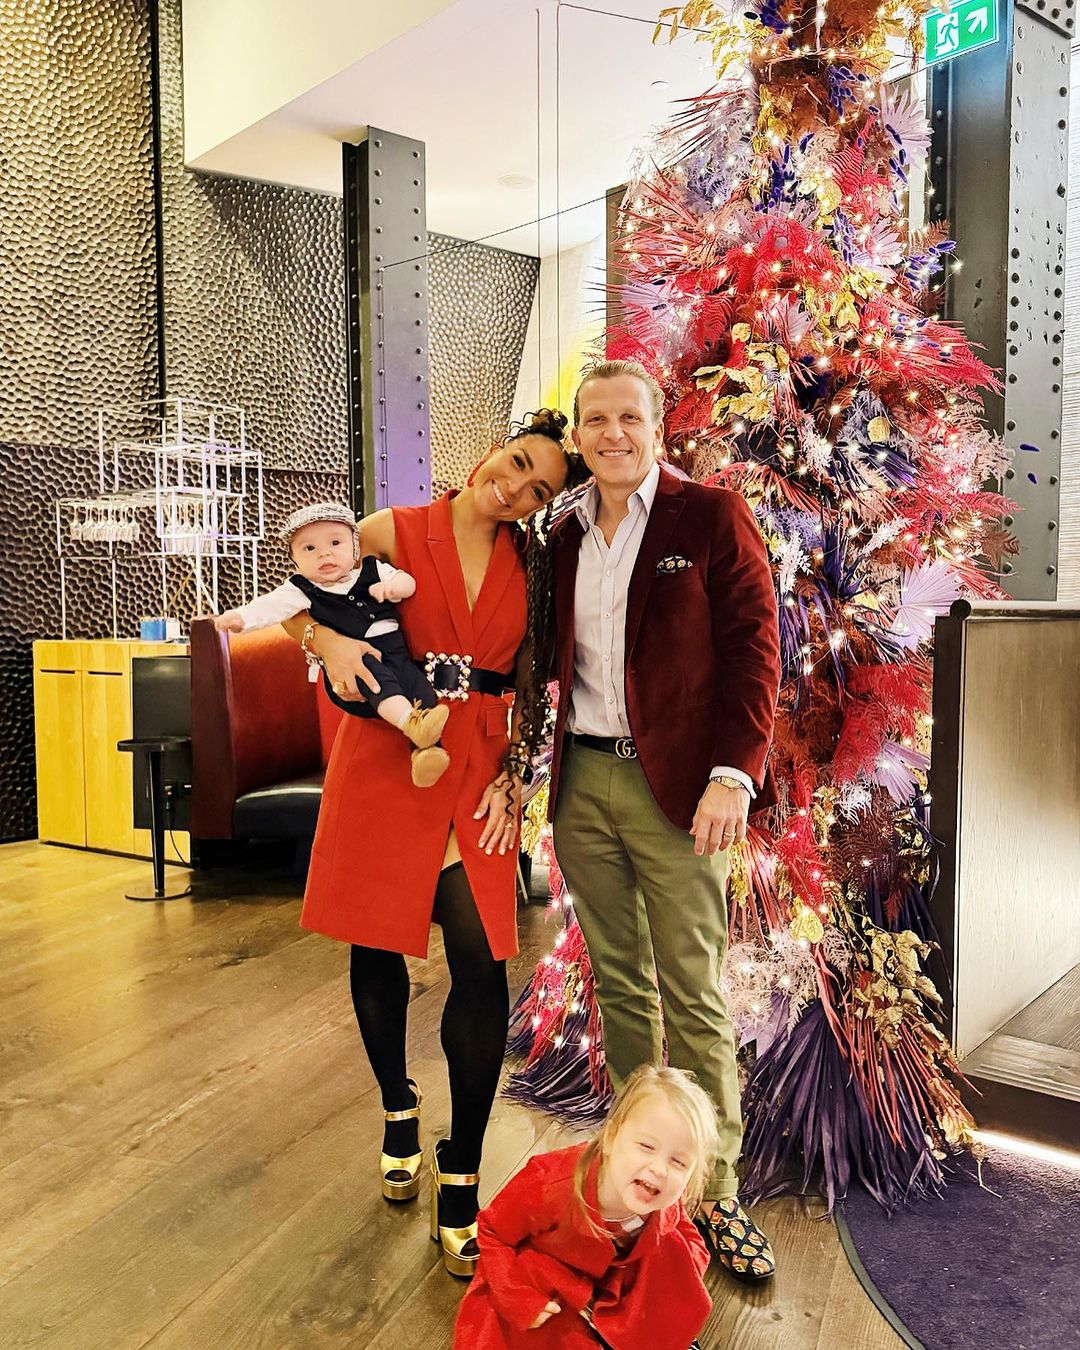 Robin Arzón and Drew Butler celebrate with their children in London, England